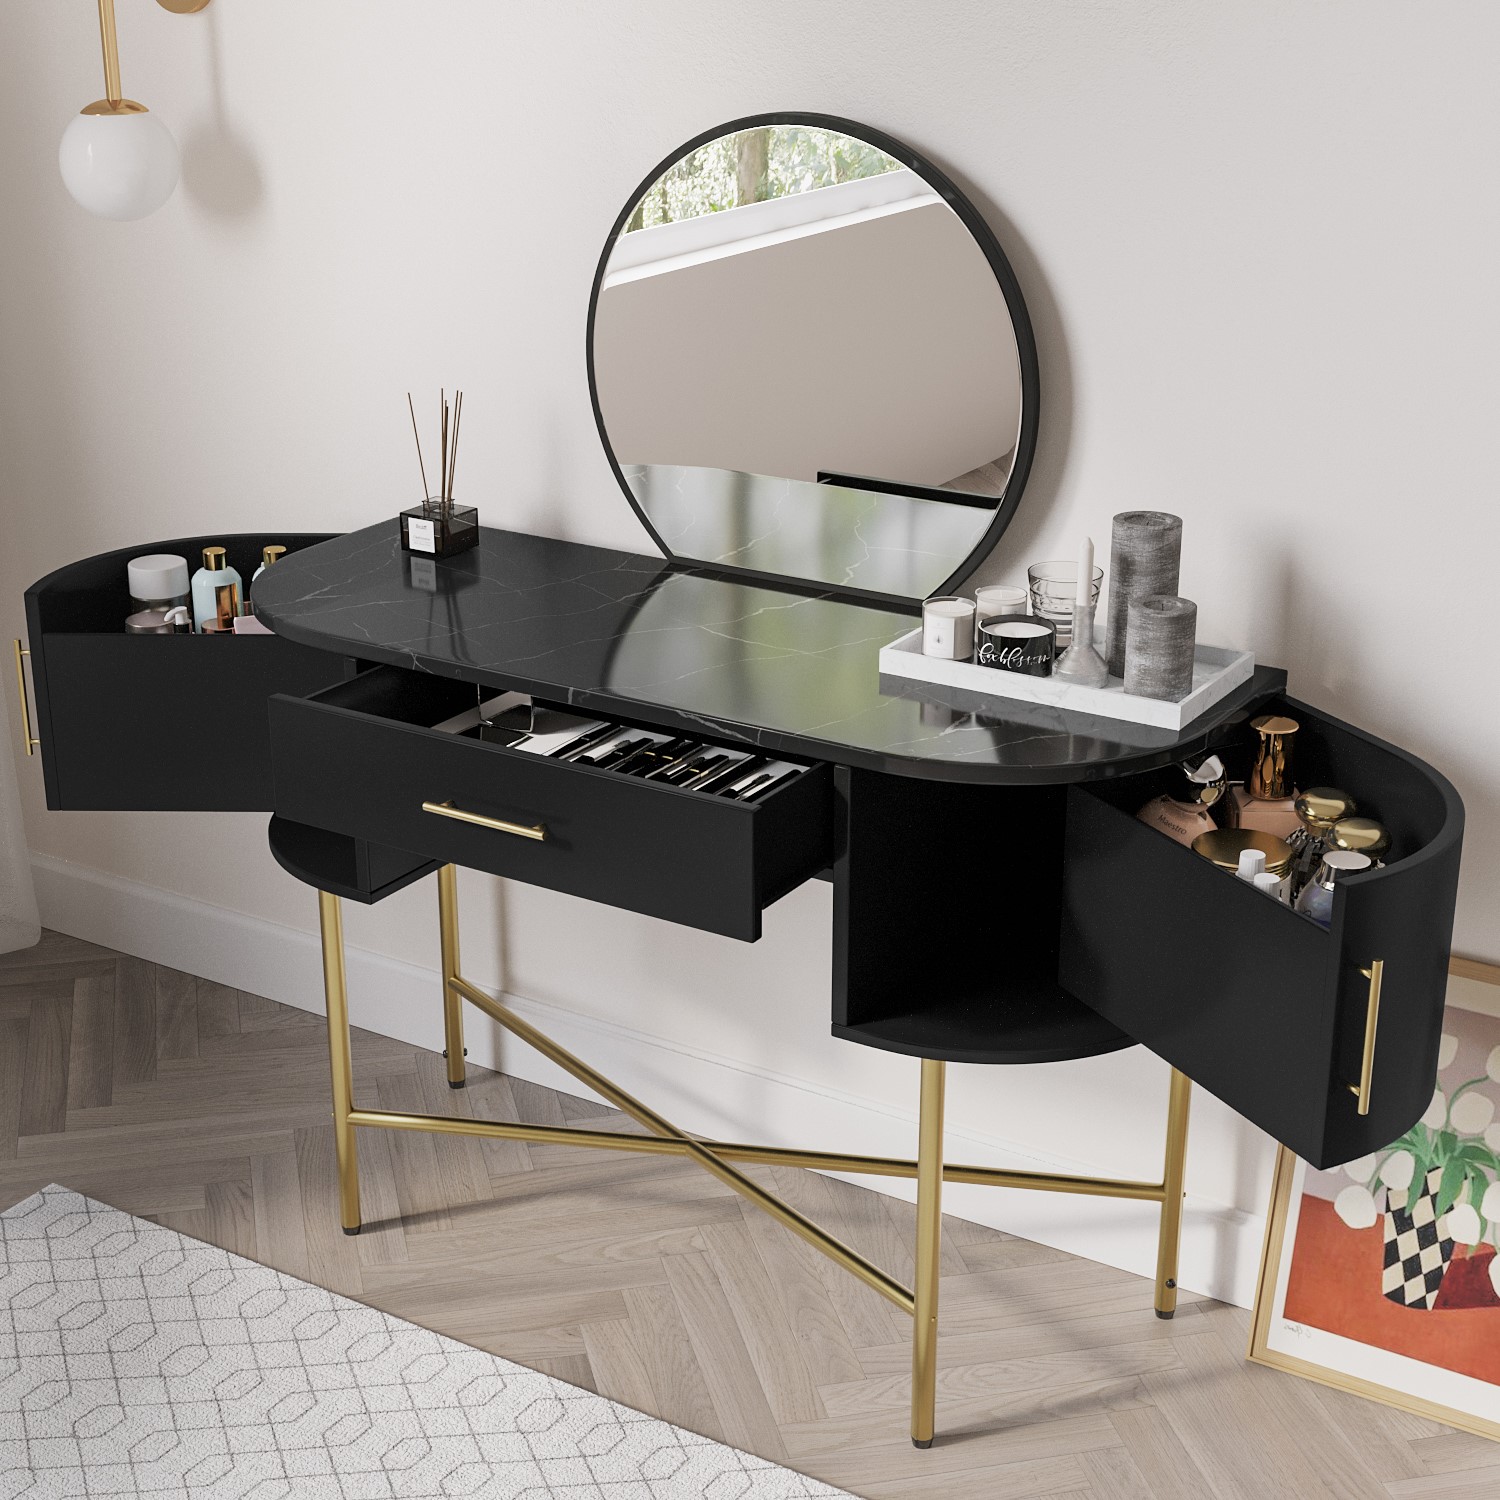 Read more about Black marble top dressing table with mirror and storage drawers gigi